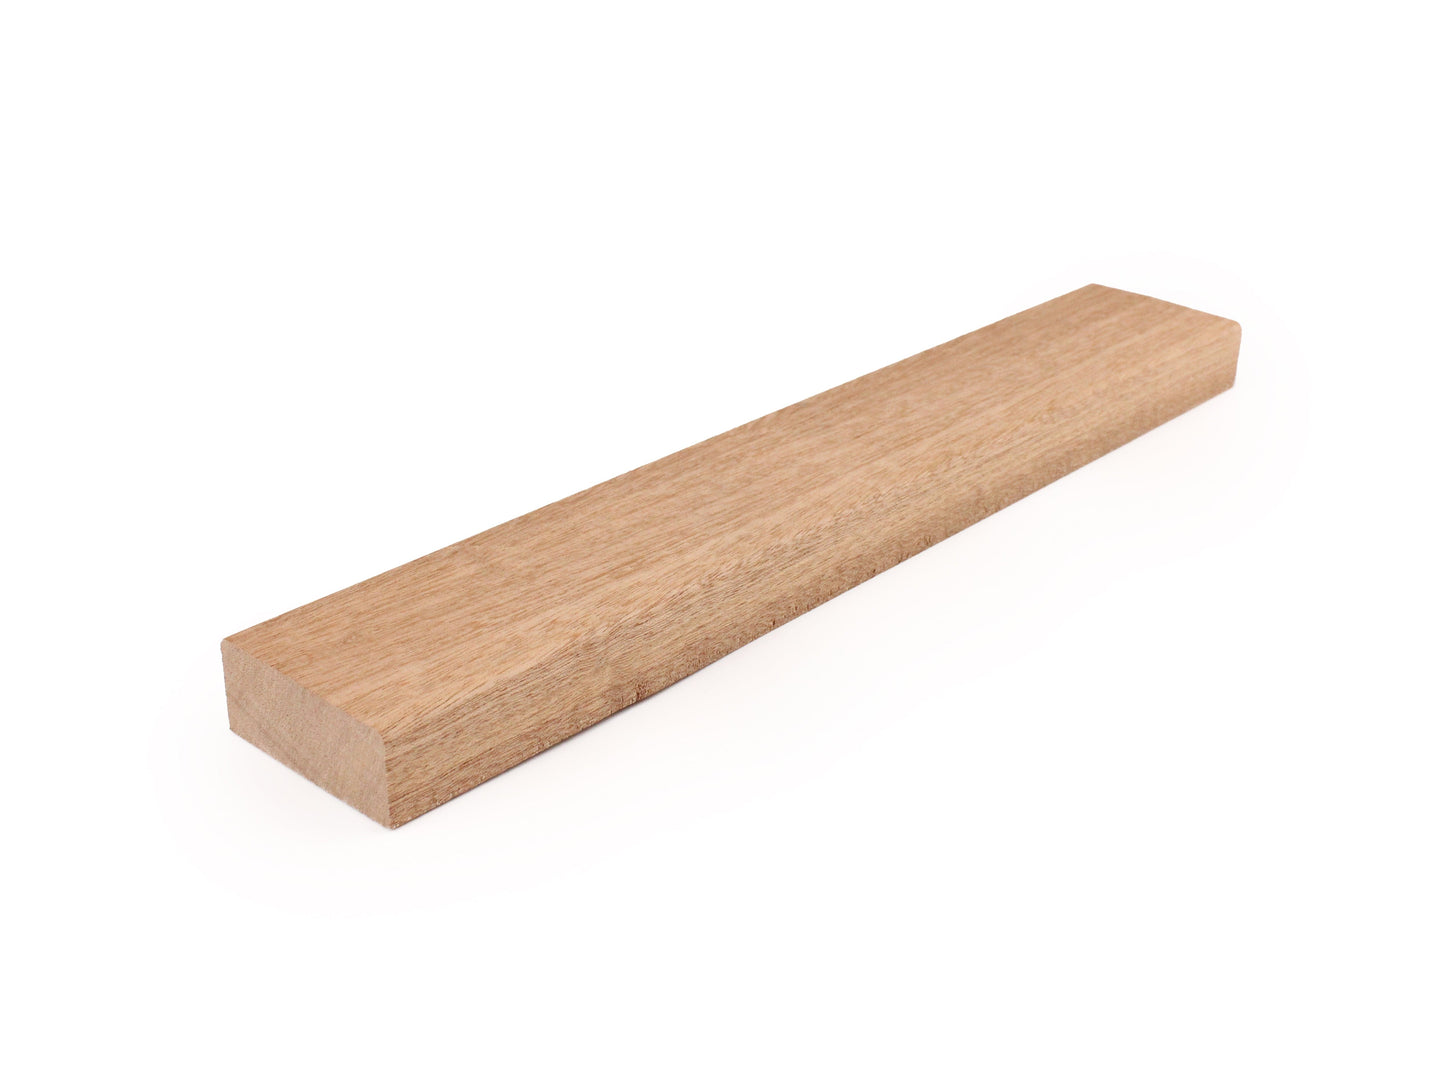 A Length of Natural Wood – The Makerss